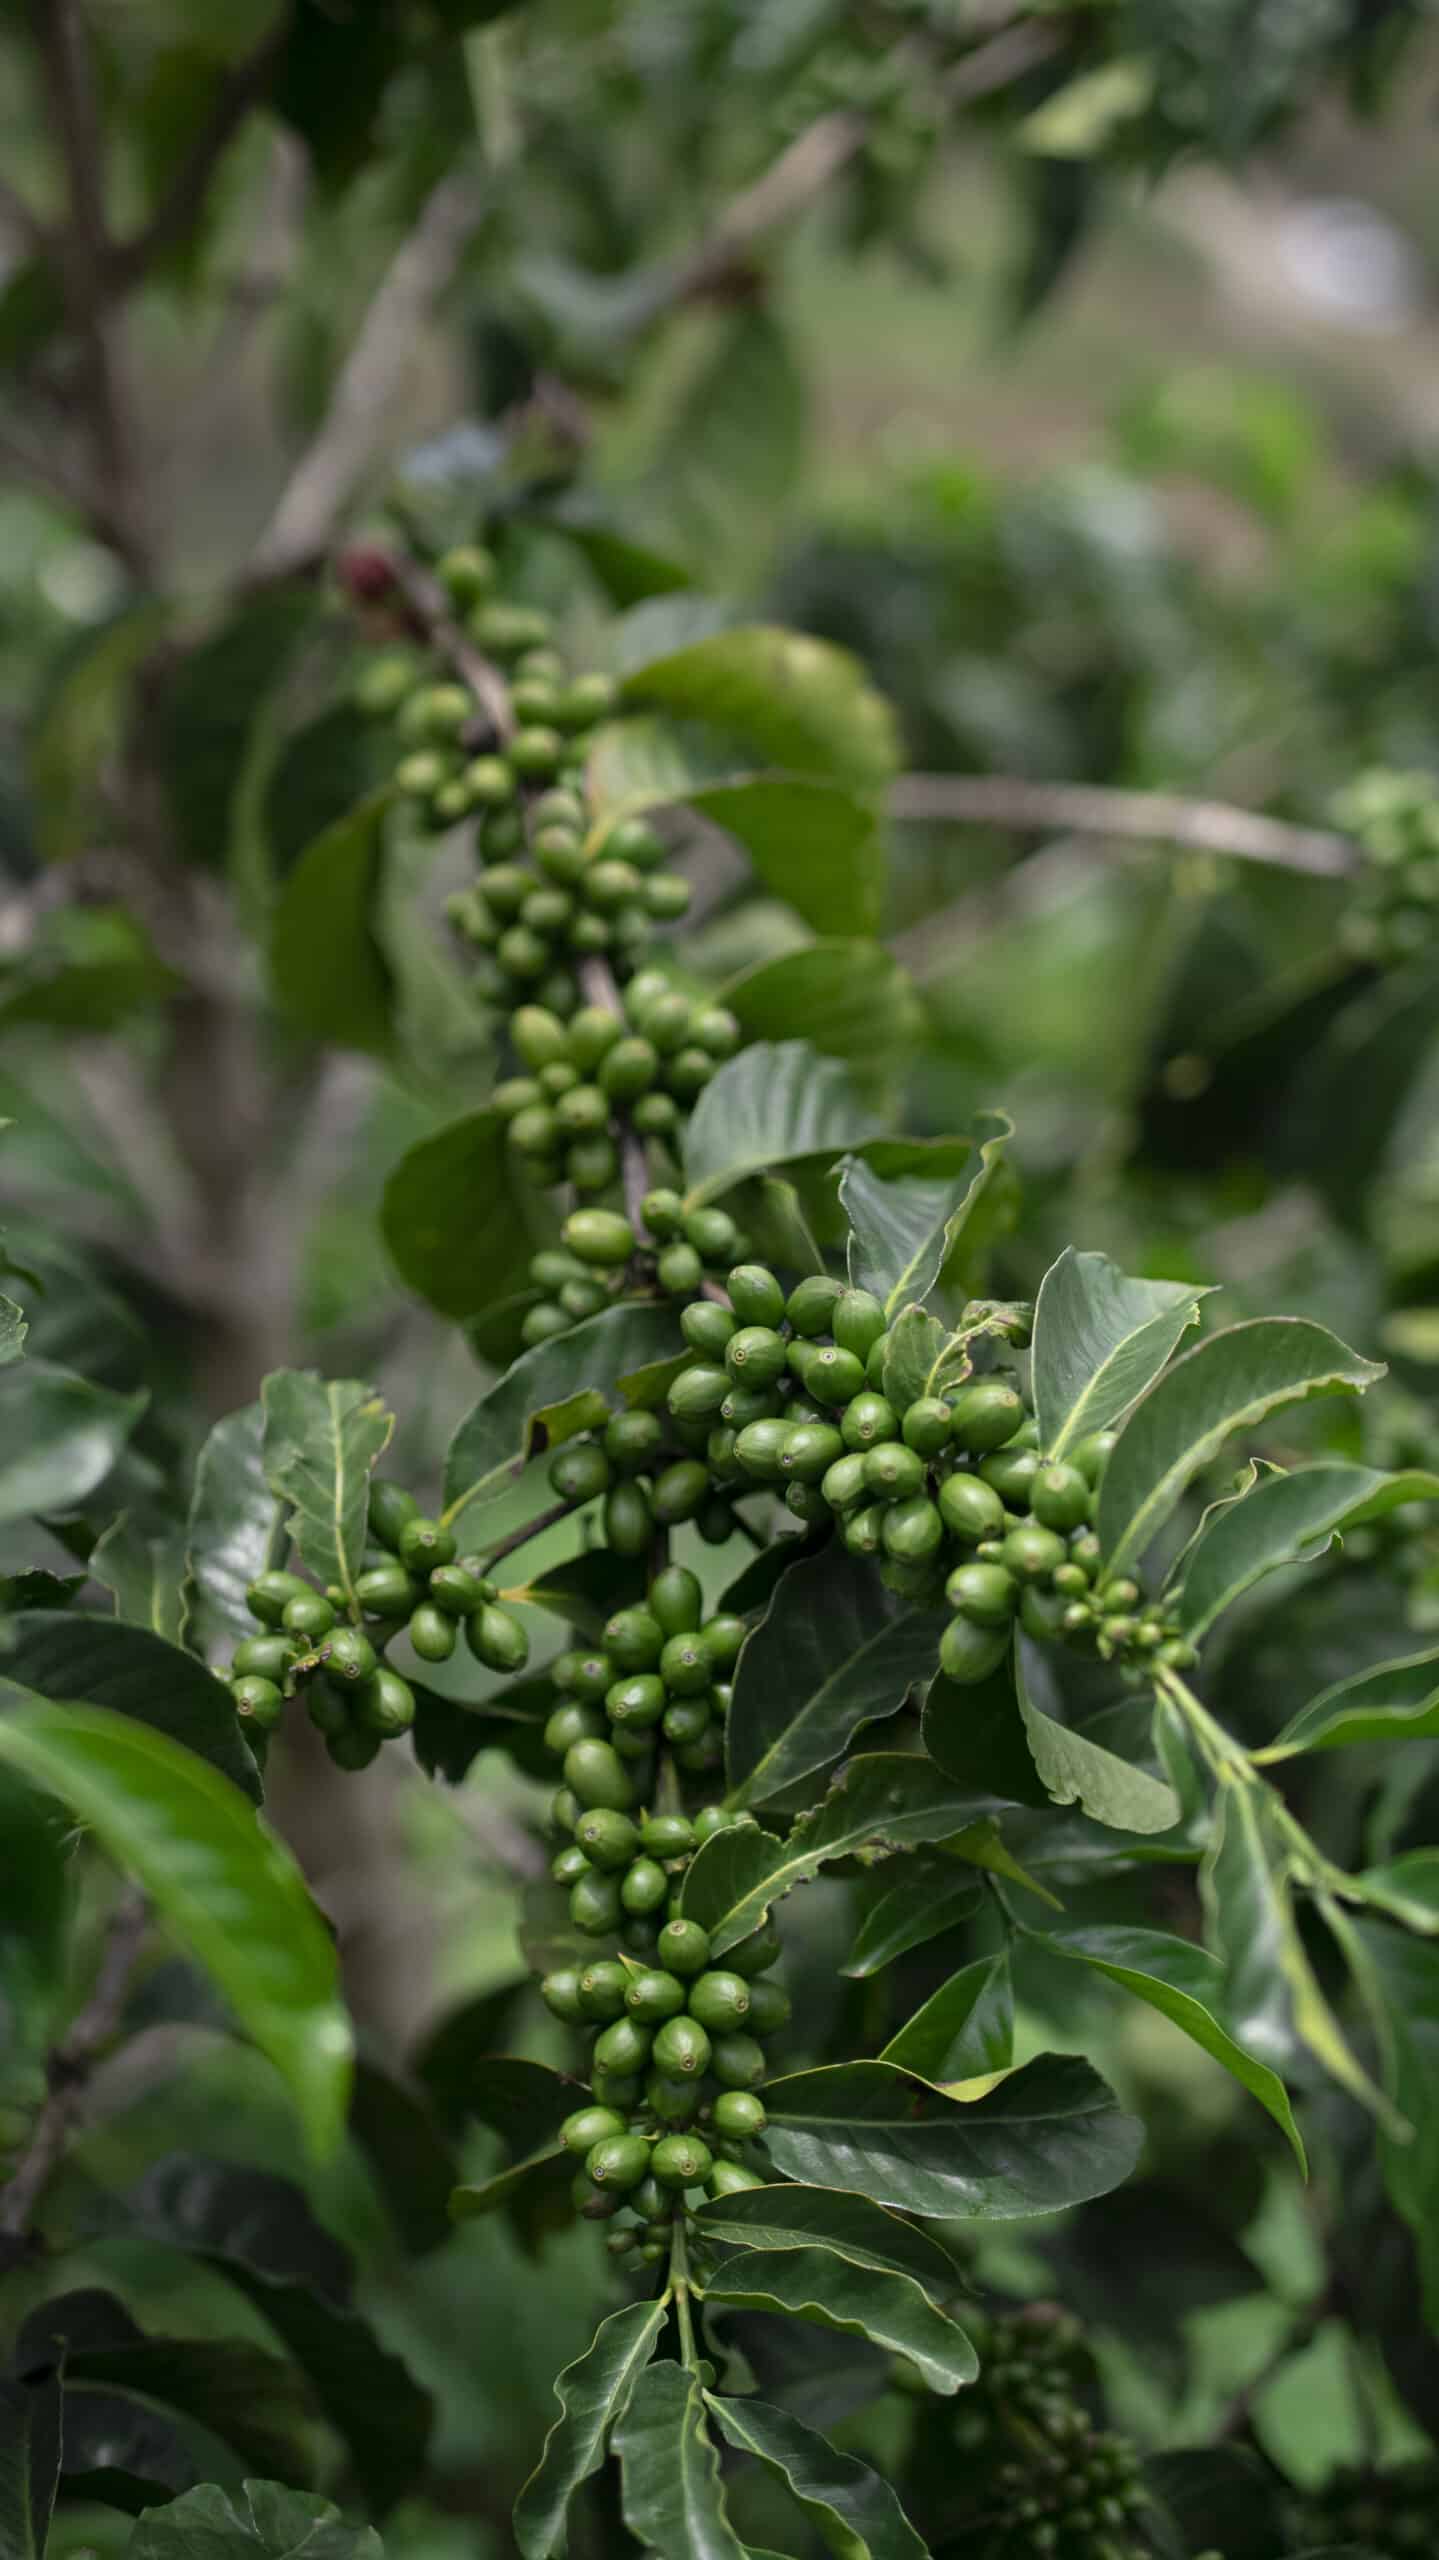 Green arabica coffee beans growing on a tree in the coffee belt in Ecuador